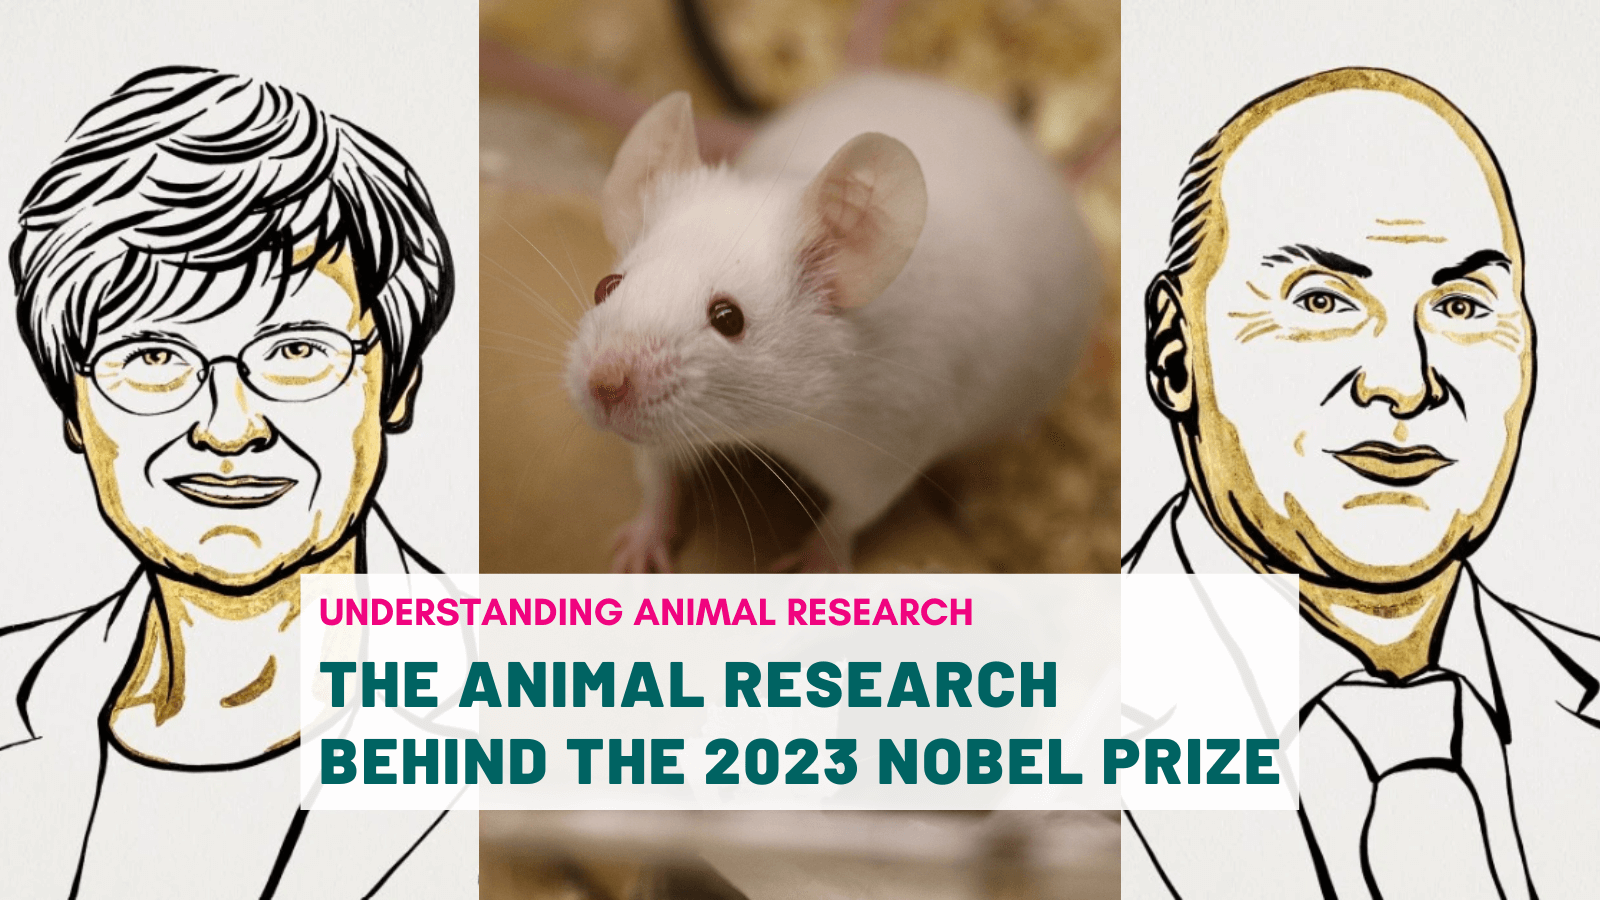 The animal research behind the 2023 Nobel Prize in Physiology or Medicine